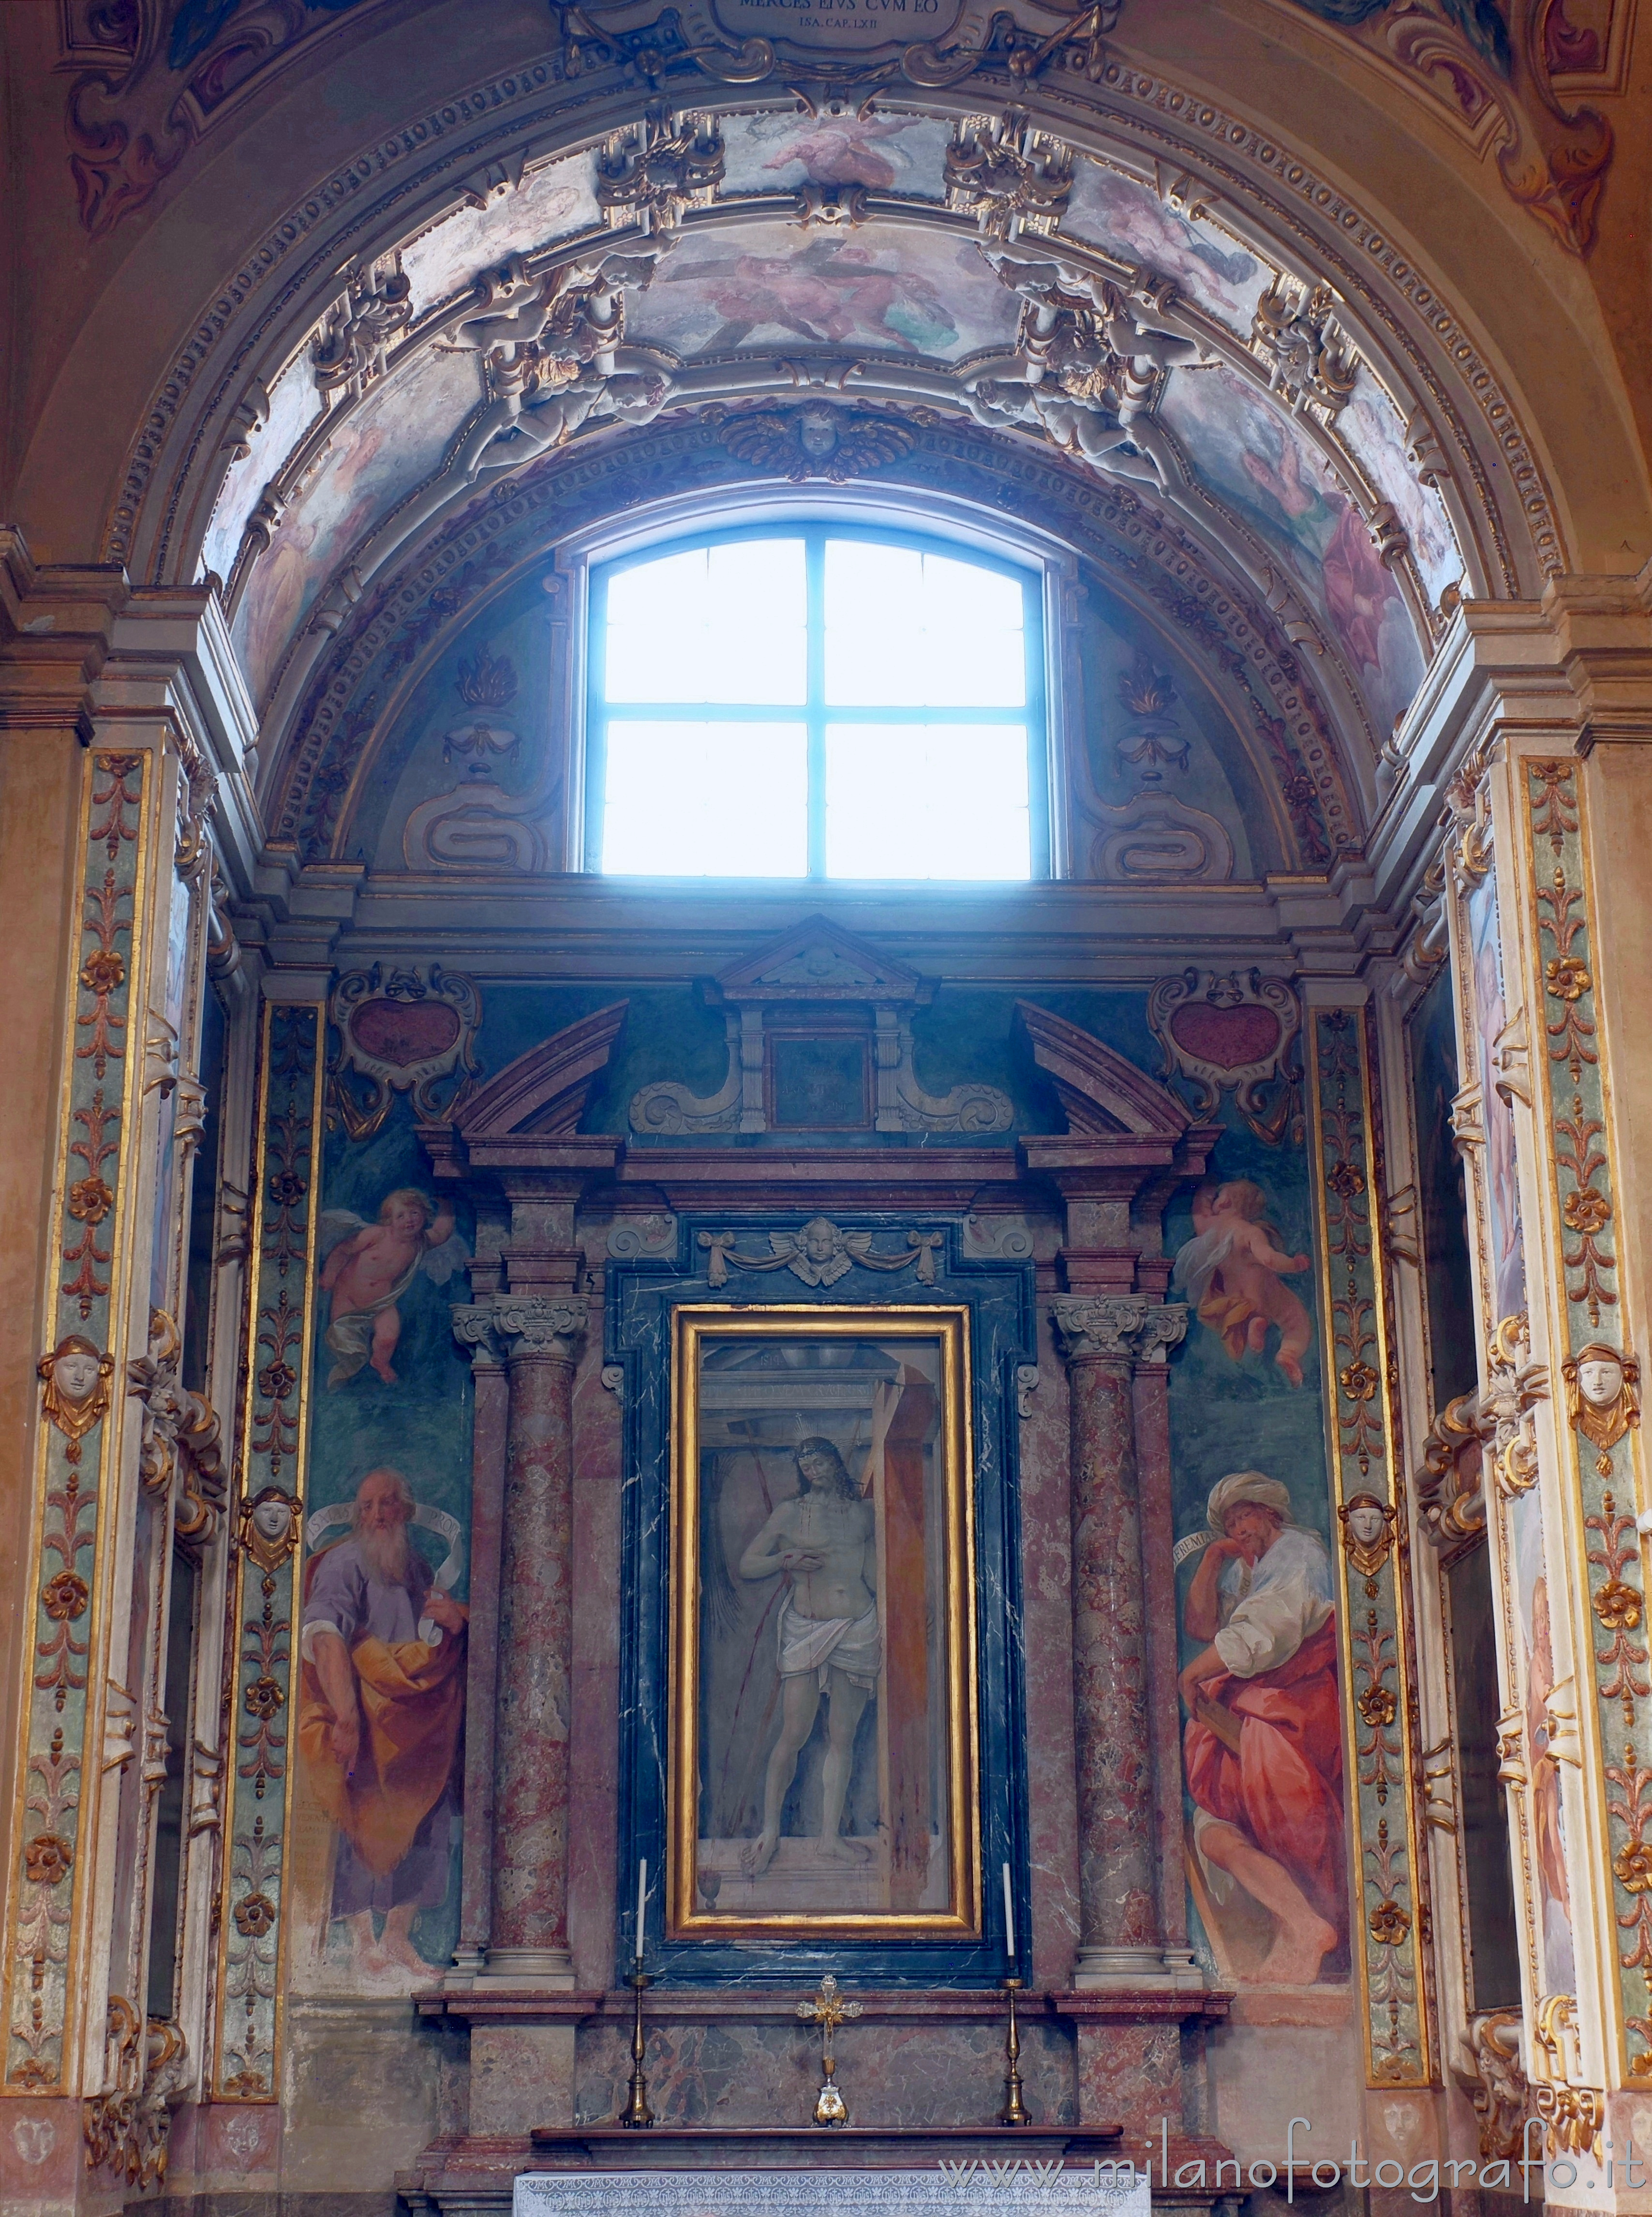 Vimercate (Monza e Brianza, Italy): Chapel of the Savior in the Sanctuary of the Blessed Virgin of the Rosary - Vimercate (Monza e Brianza, Italy)